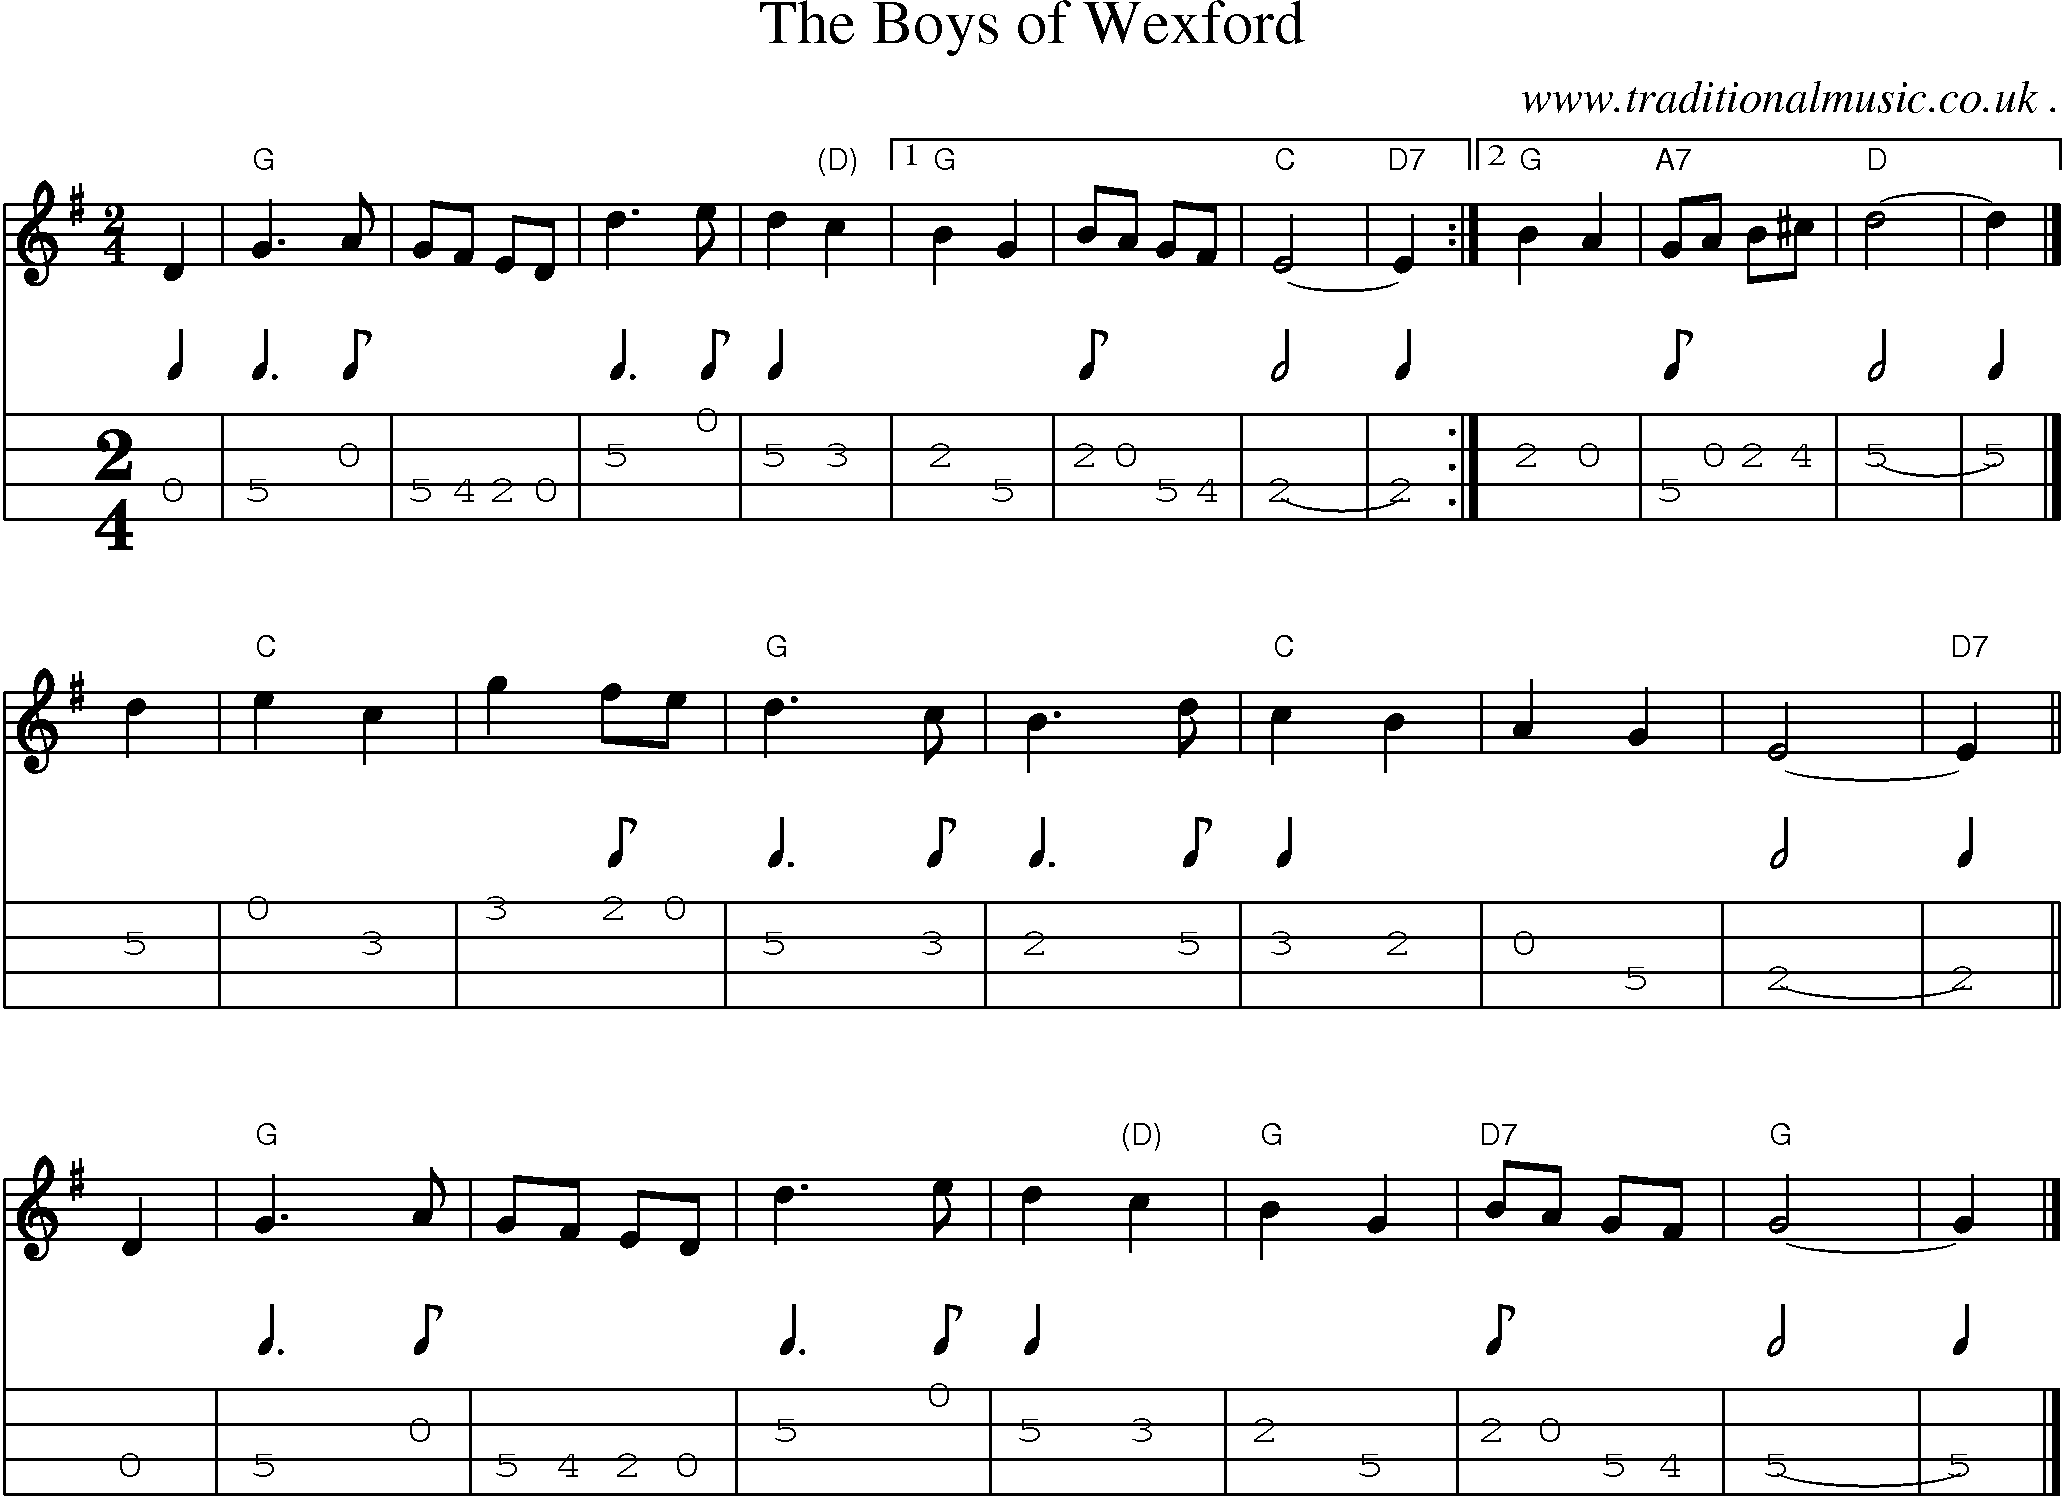 Sheet-music  score, Chords and Mandolin Tabs for The Boys Of Wexford